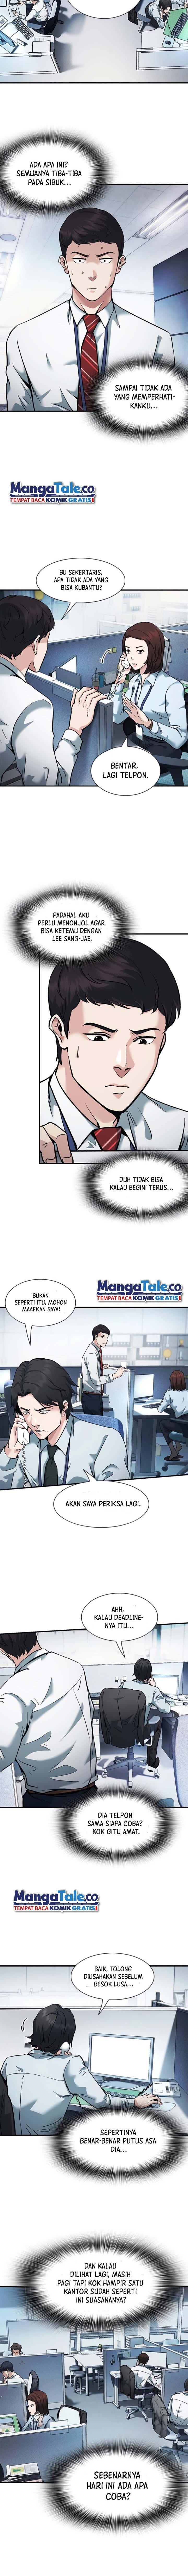 Chairman Kang, The New Employee Chapter 6